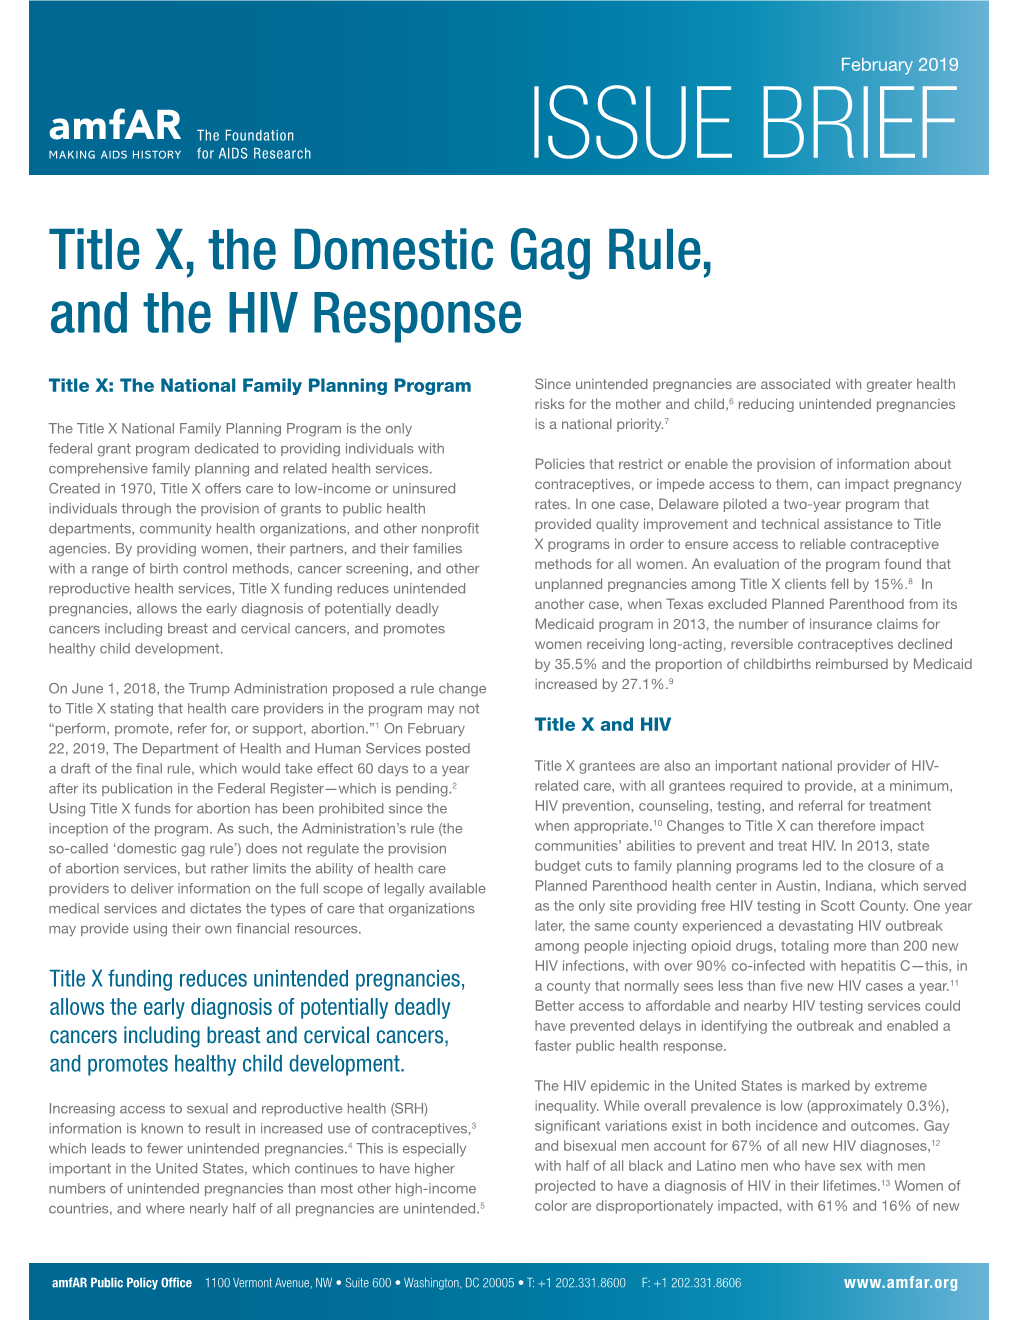 ISSUE BRIEF Title X, the Domestic Gag Rule, and the HIV Response